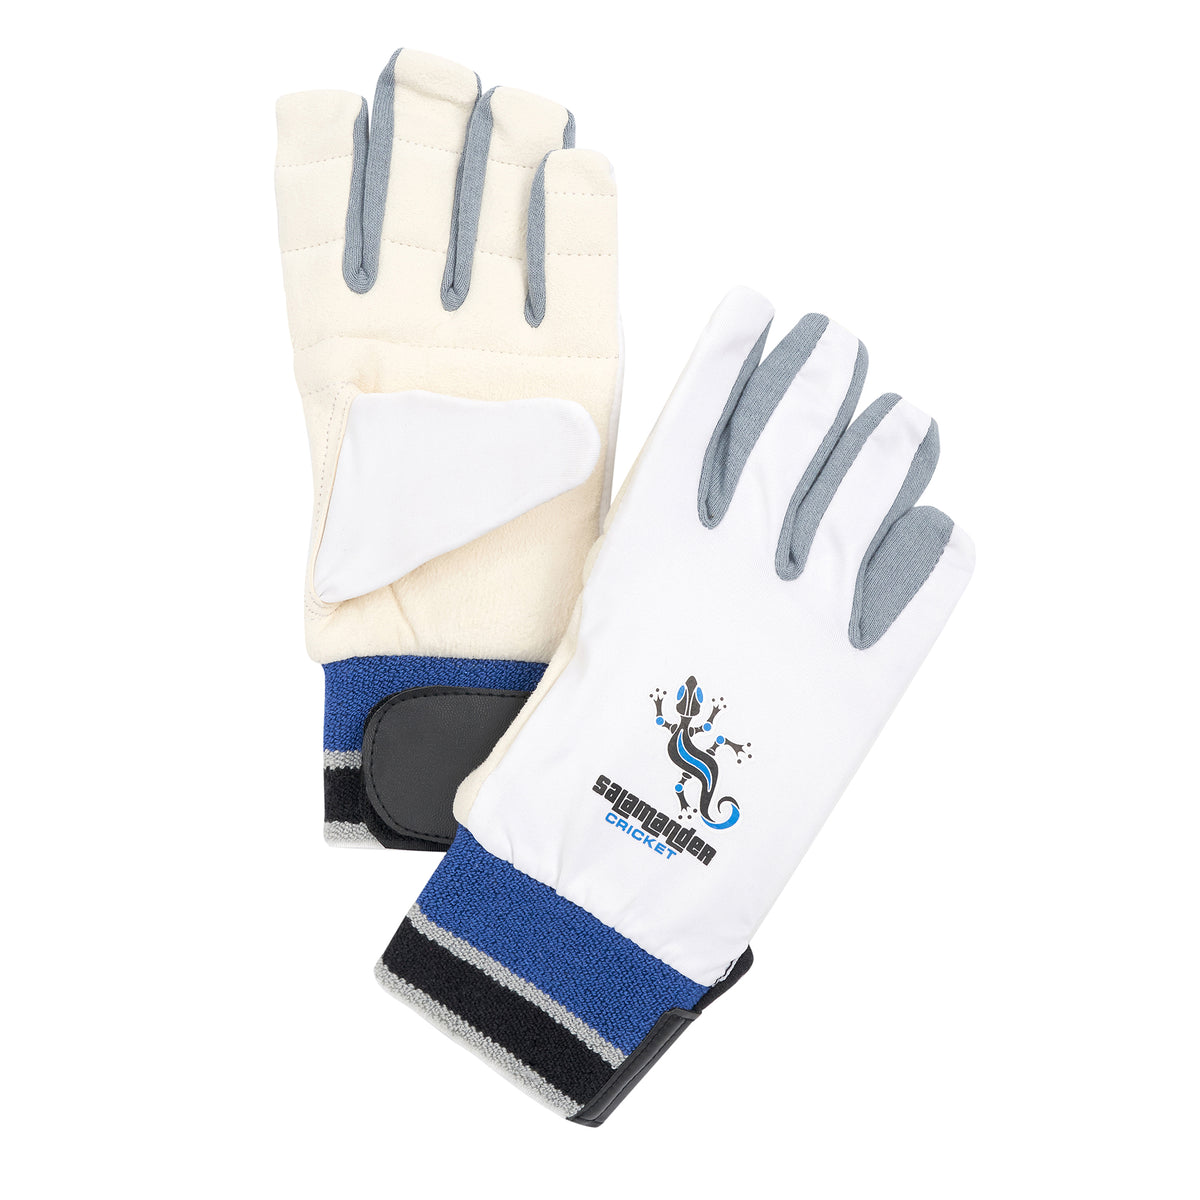 Salamander Wicket Keeping Inners Cotton/Cham Padded